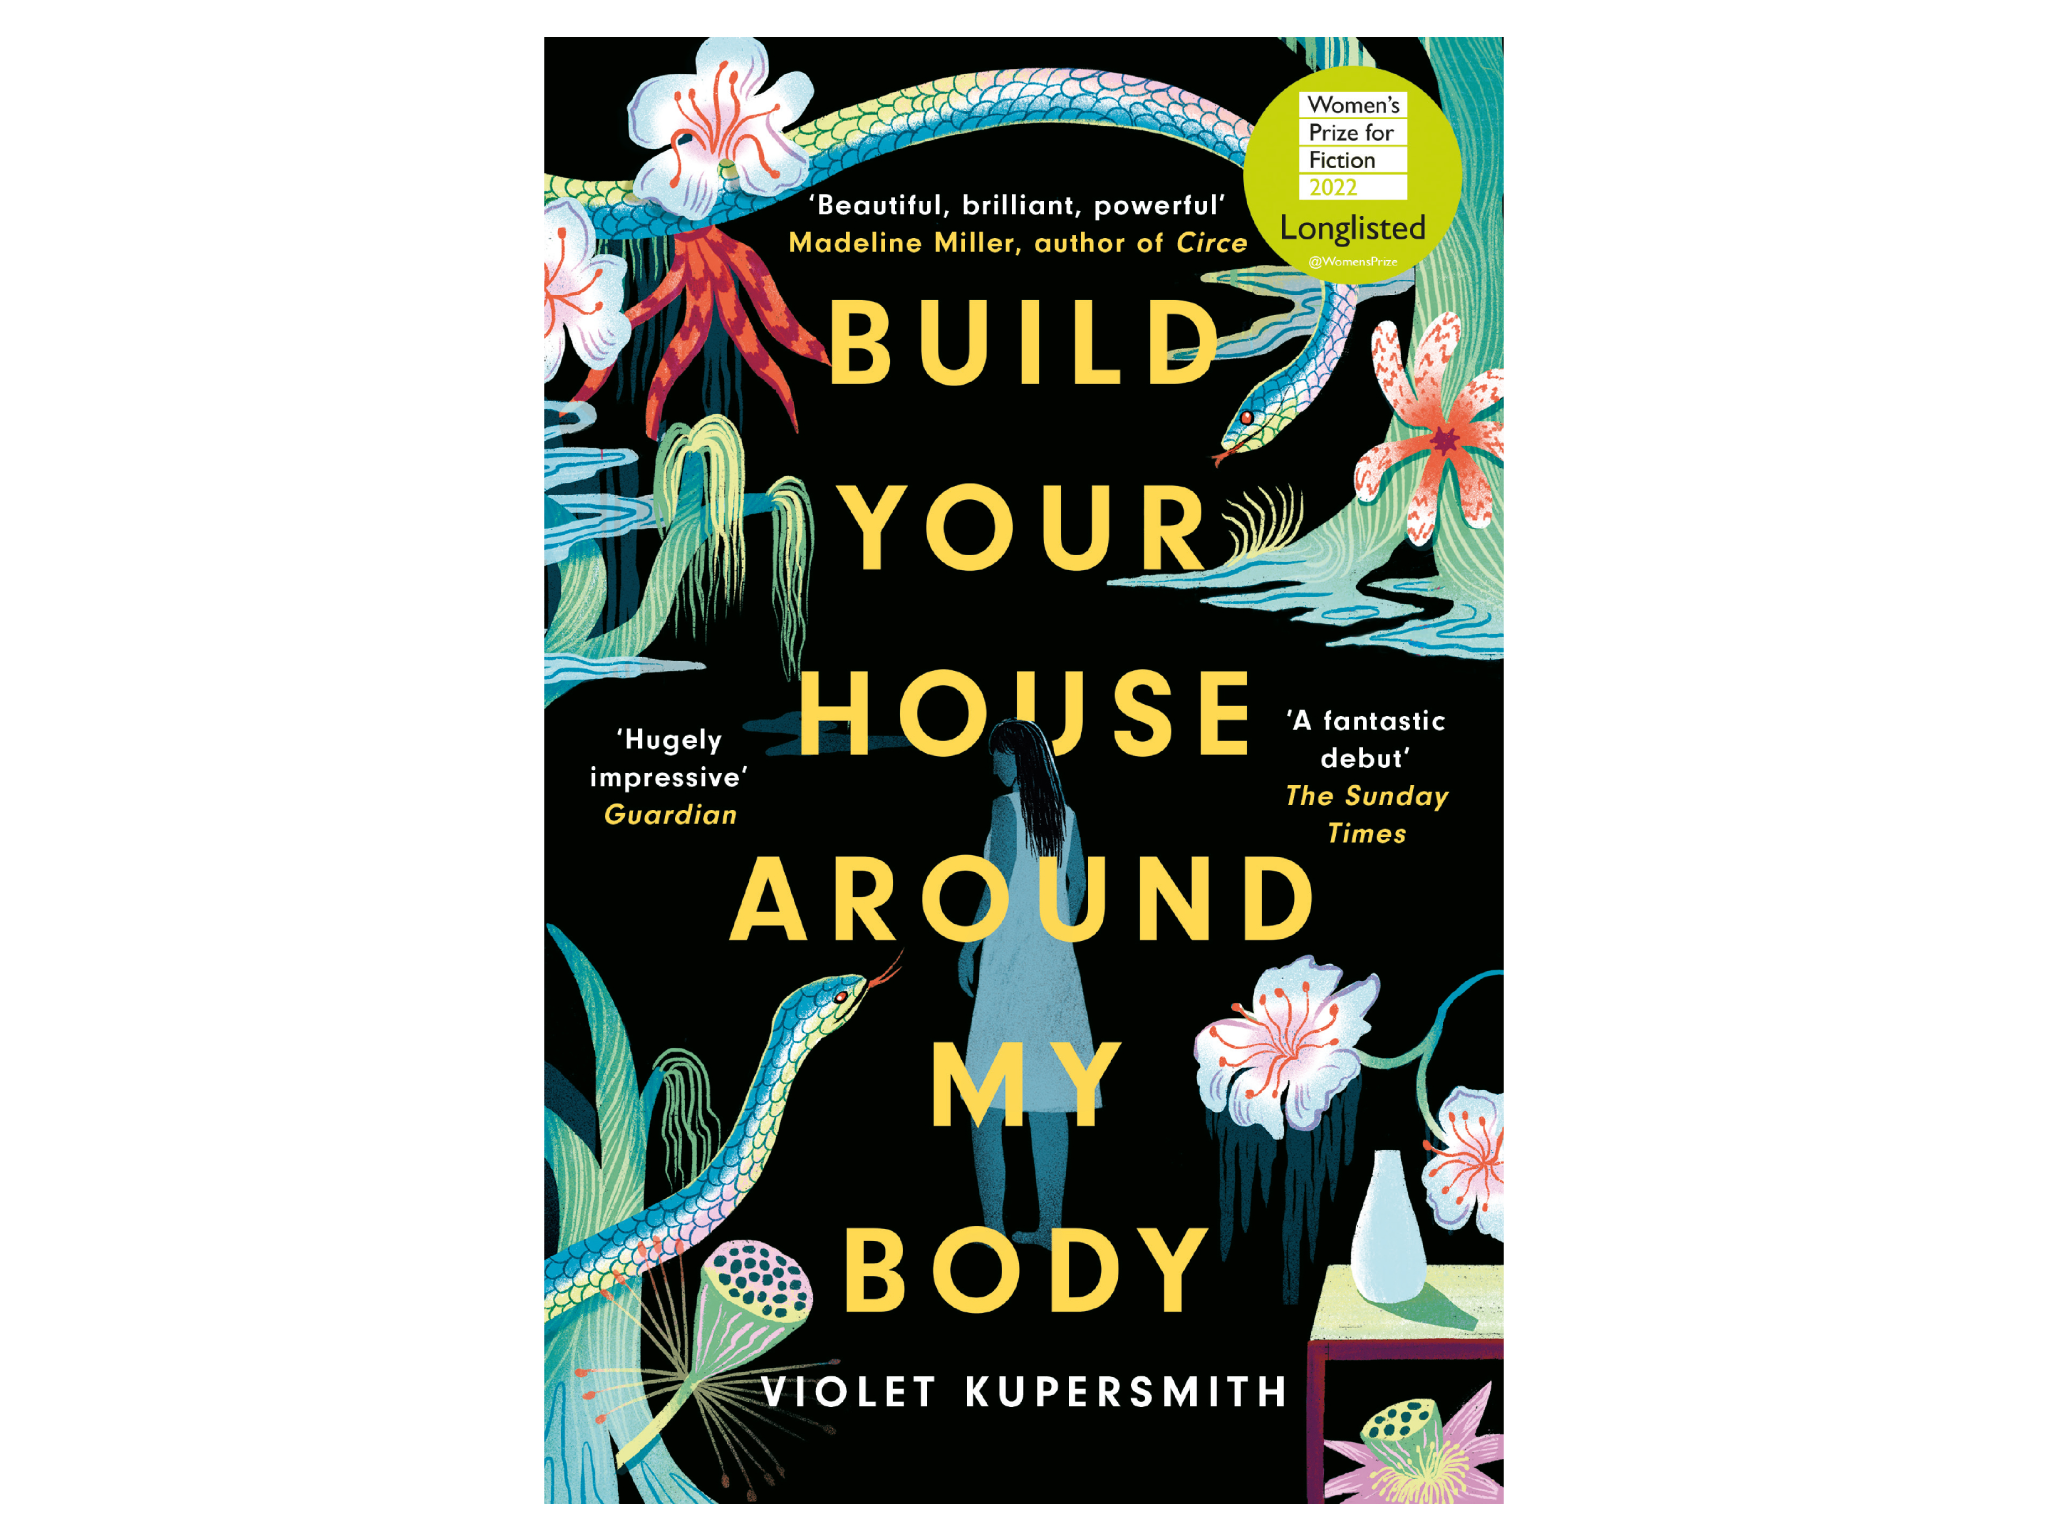 Build-Your-House - -womens-prize-for-fiction-longlist-indybest